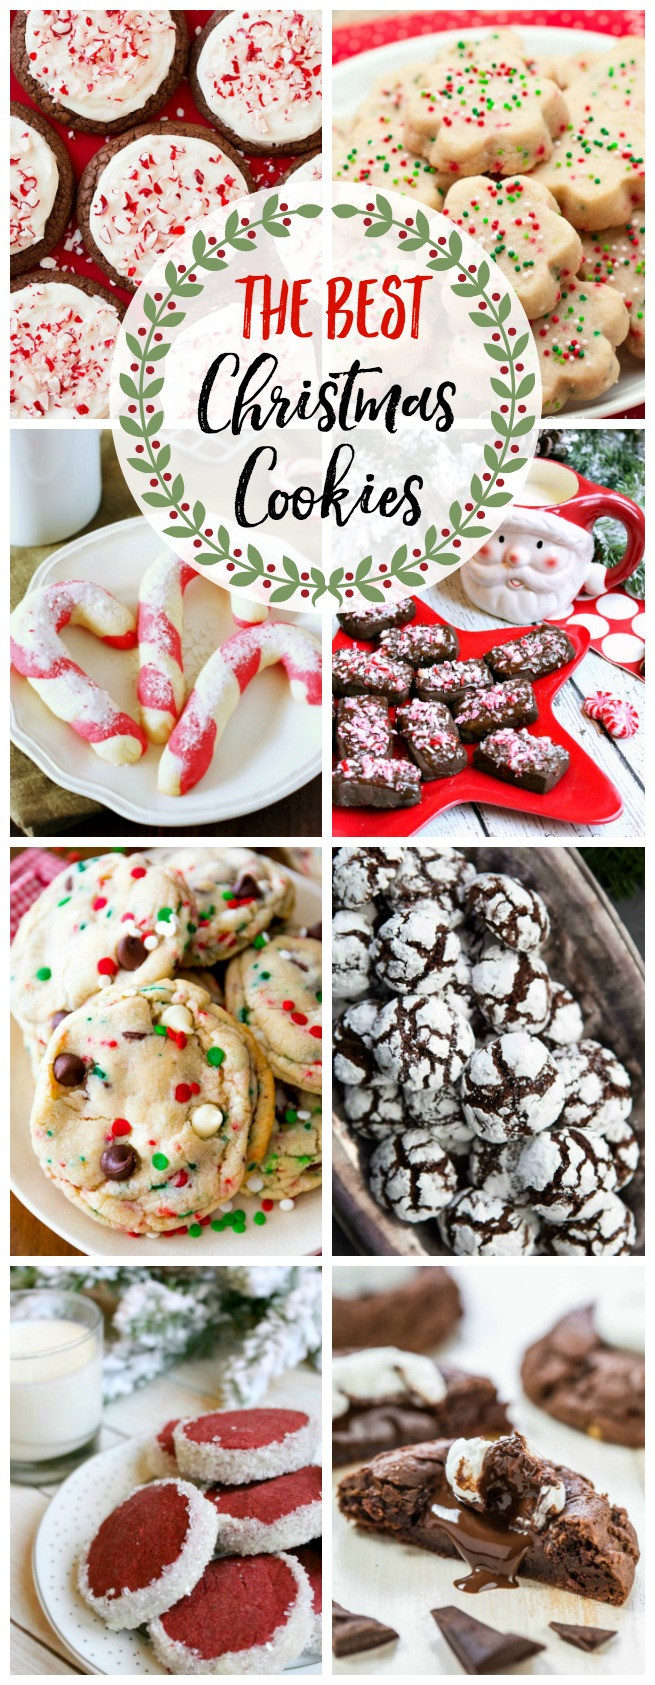 The Best Christmas Cookies
 The Best Christmas Cookie Recipes and 200 Other